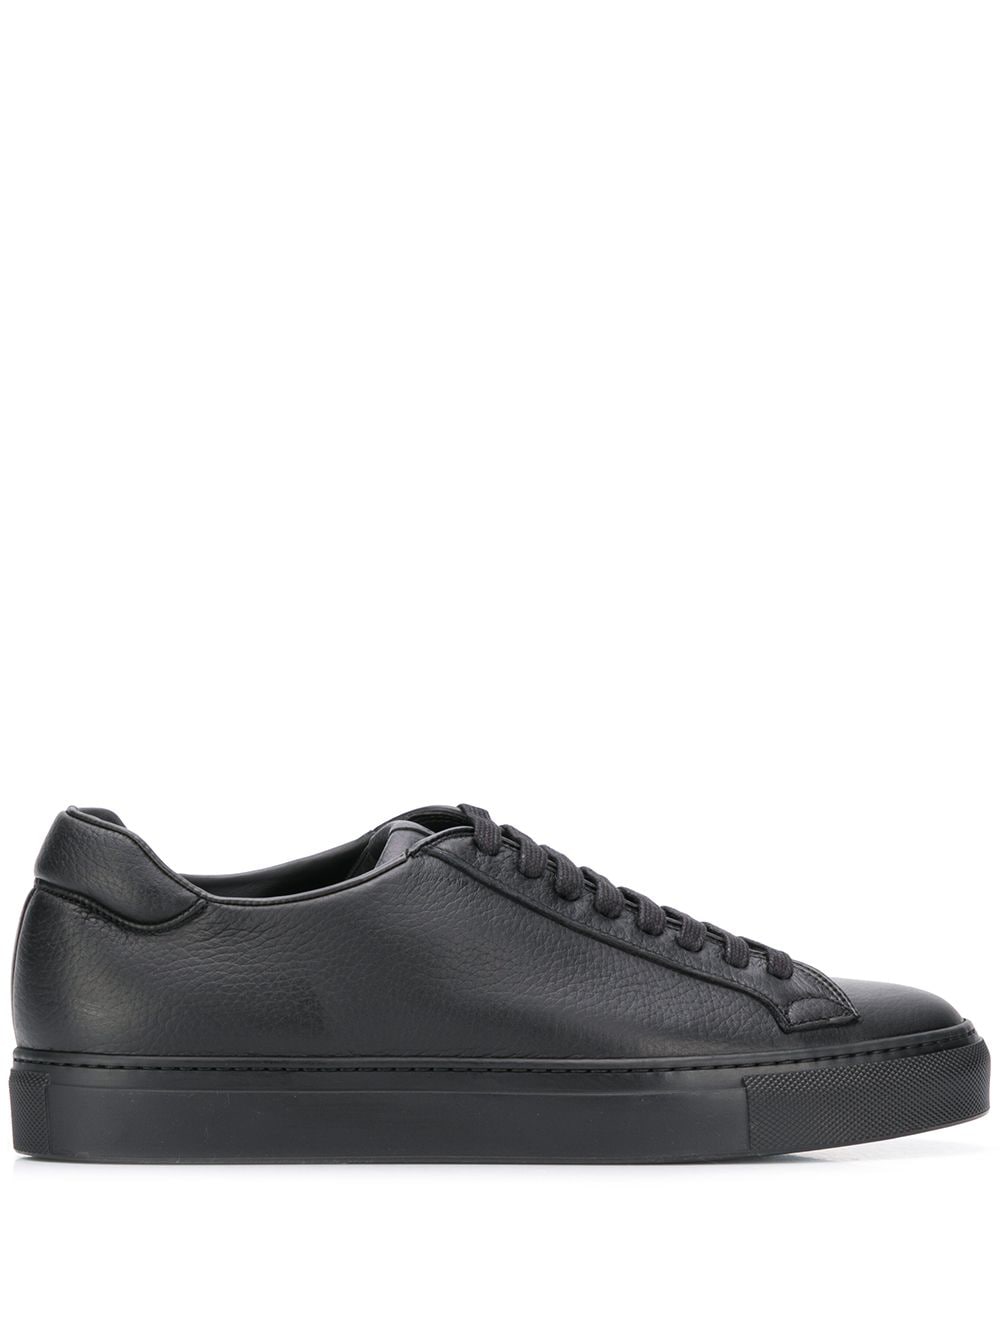 Scarosso lace-up low top sneakers - Black von Scarosso